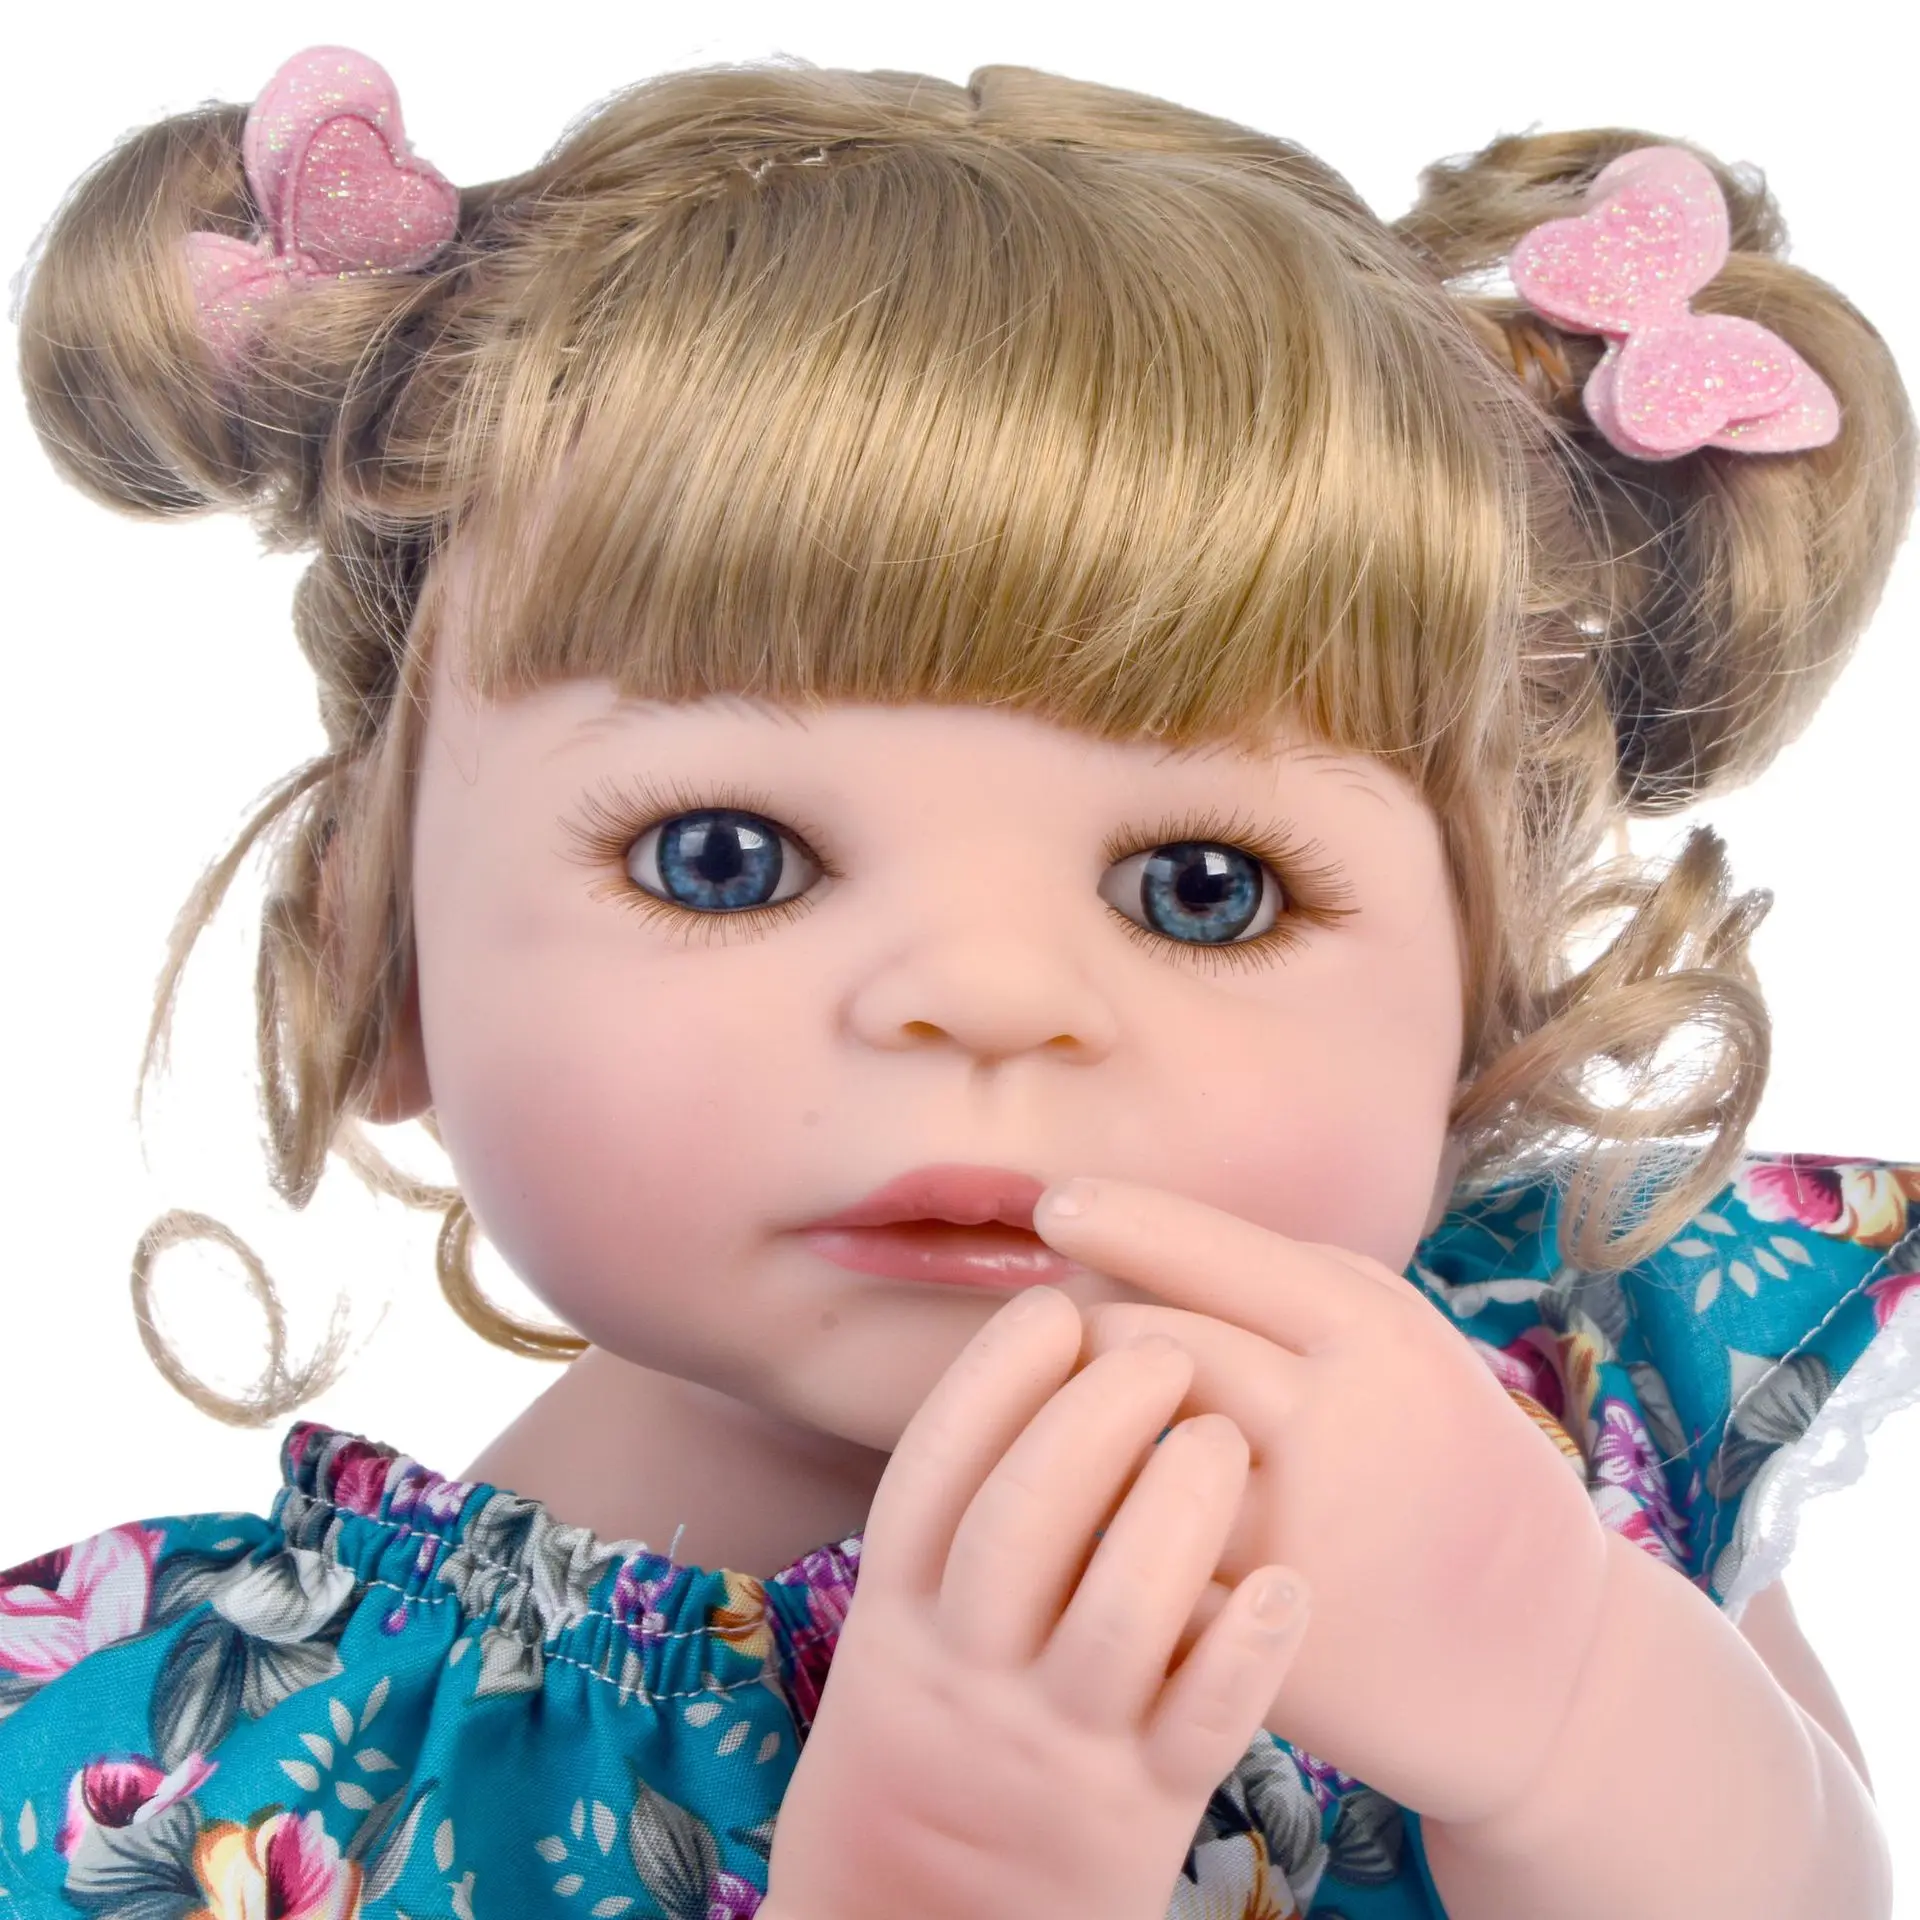 

bebes reborn doll 55cm Baby girl Dolls Full Silicone Boneca Reborn Brinquedos Bonecas children's day gifts toys bed time plamate